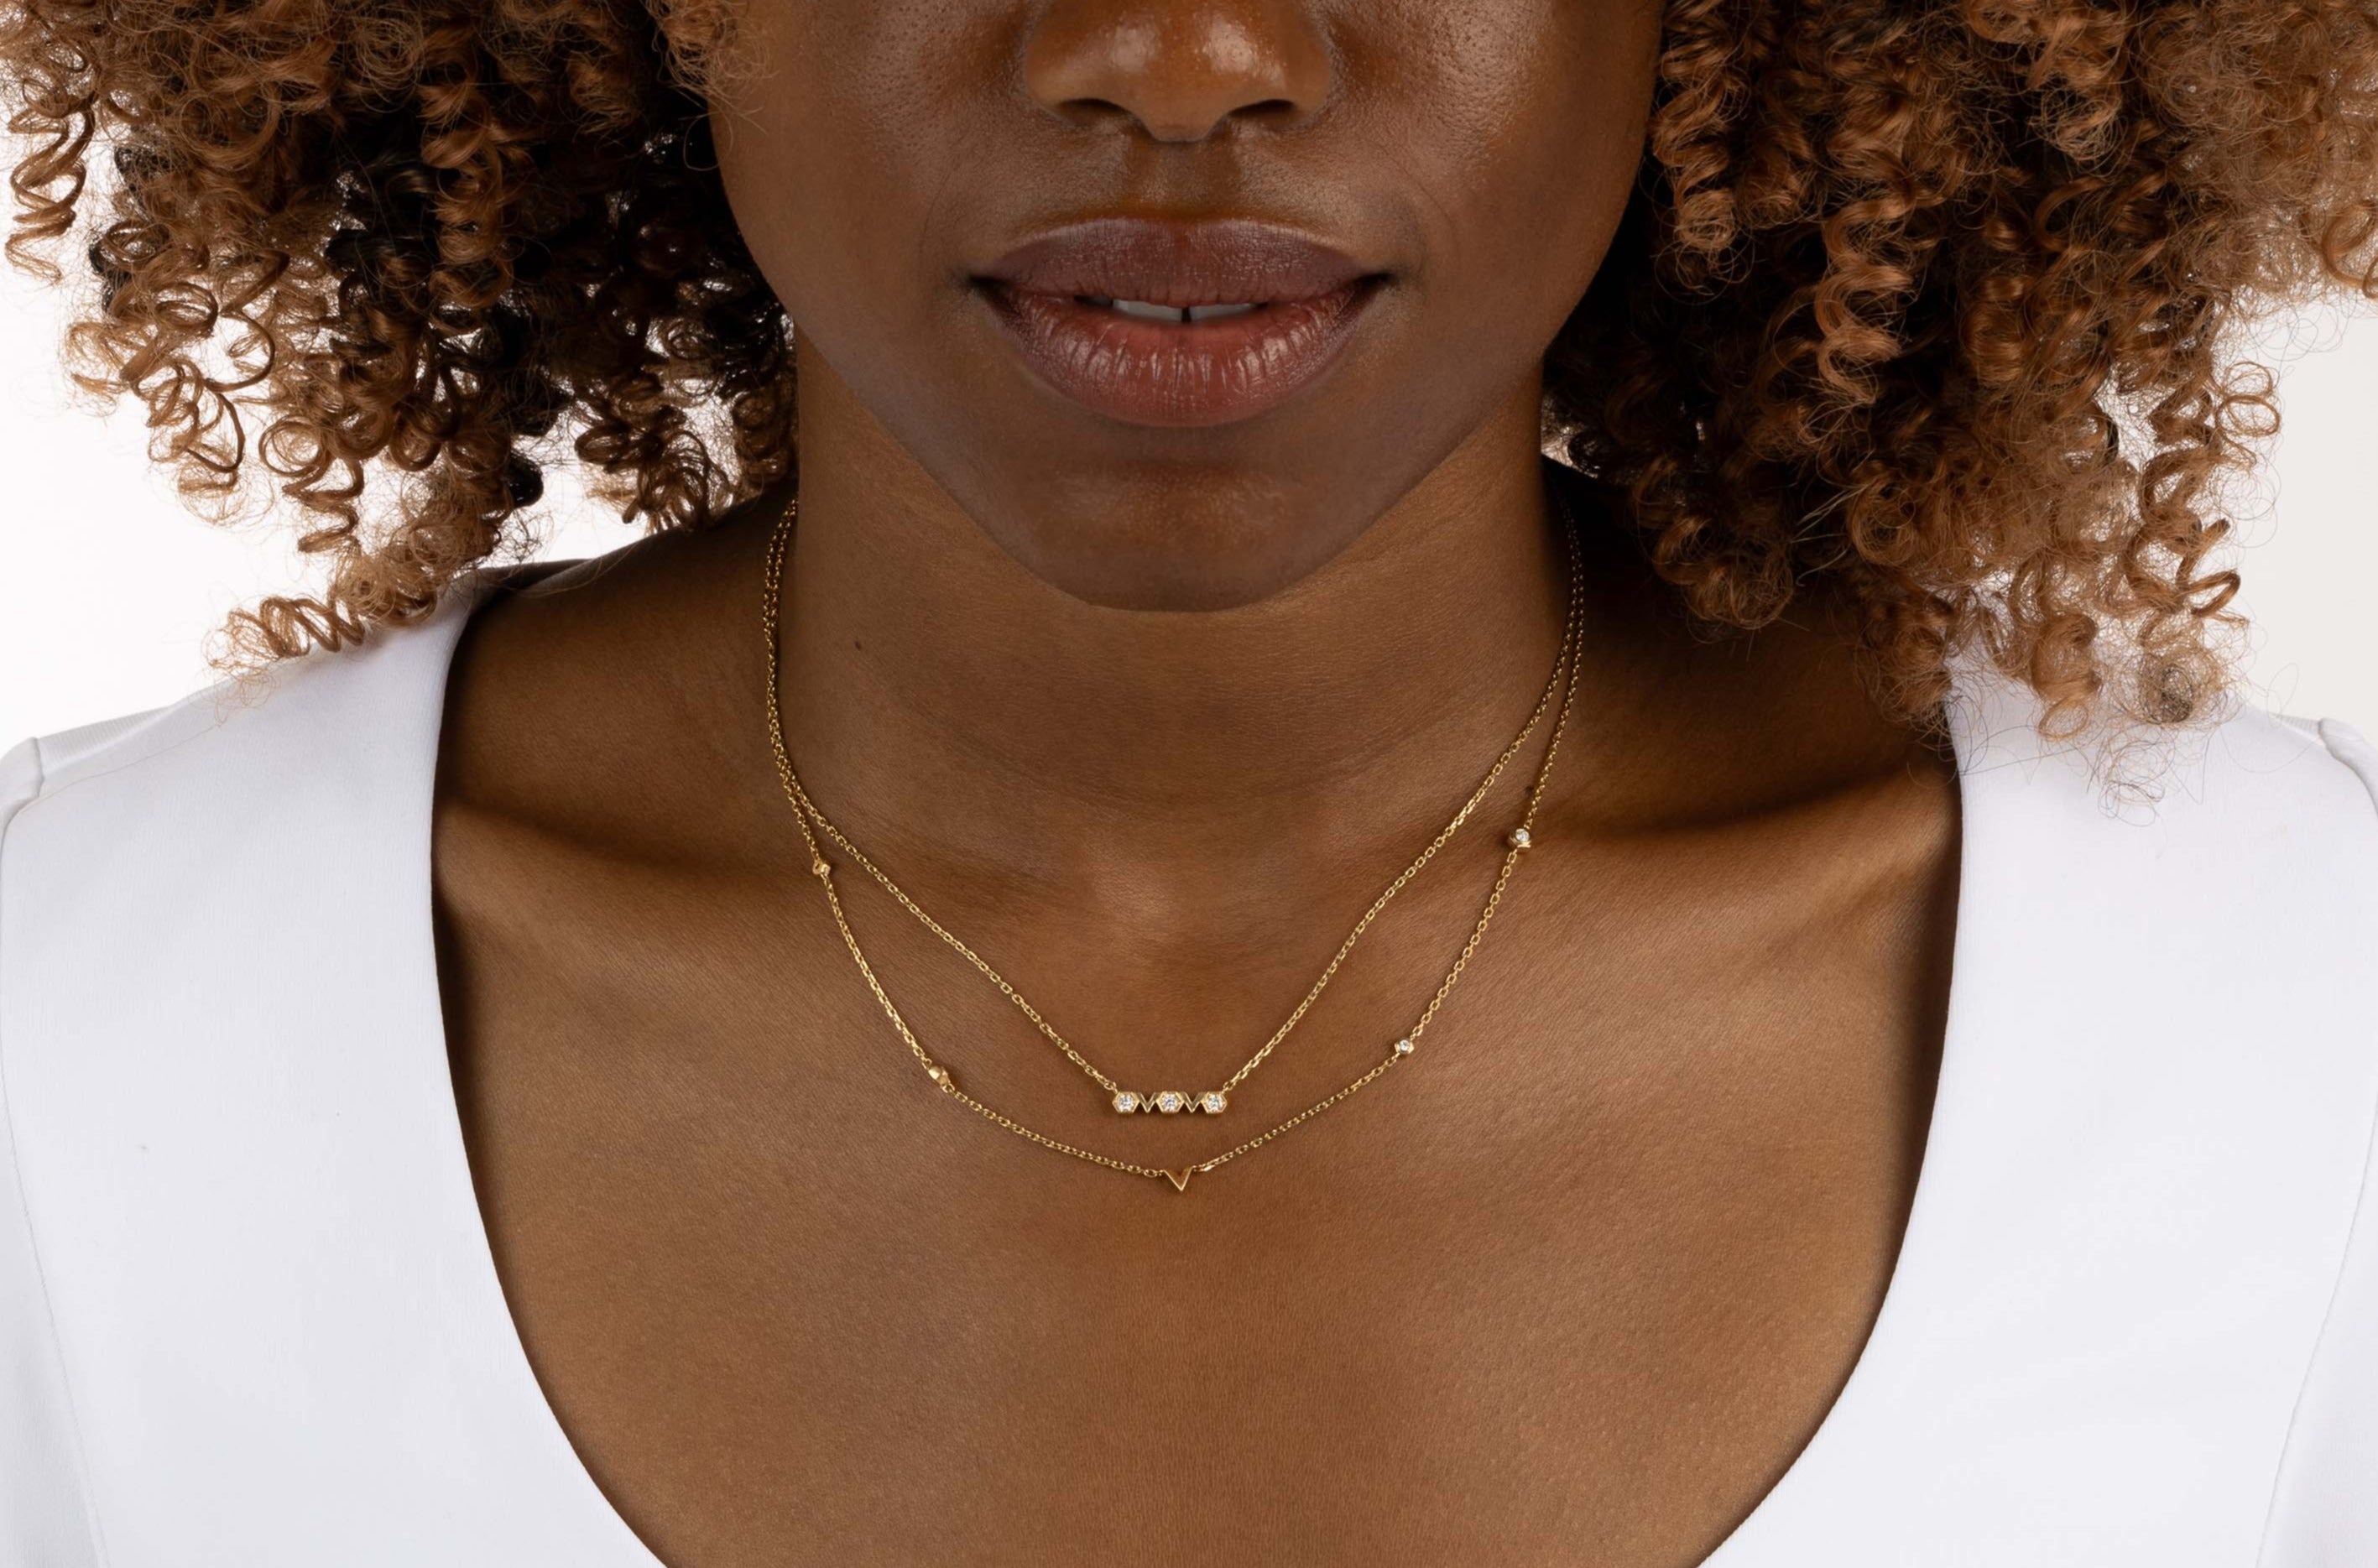 Yellow Gold Necklace with octagons and V shapes, and Diamonds, Small - Model shot